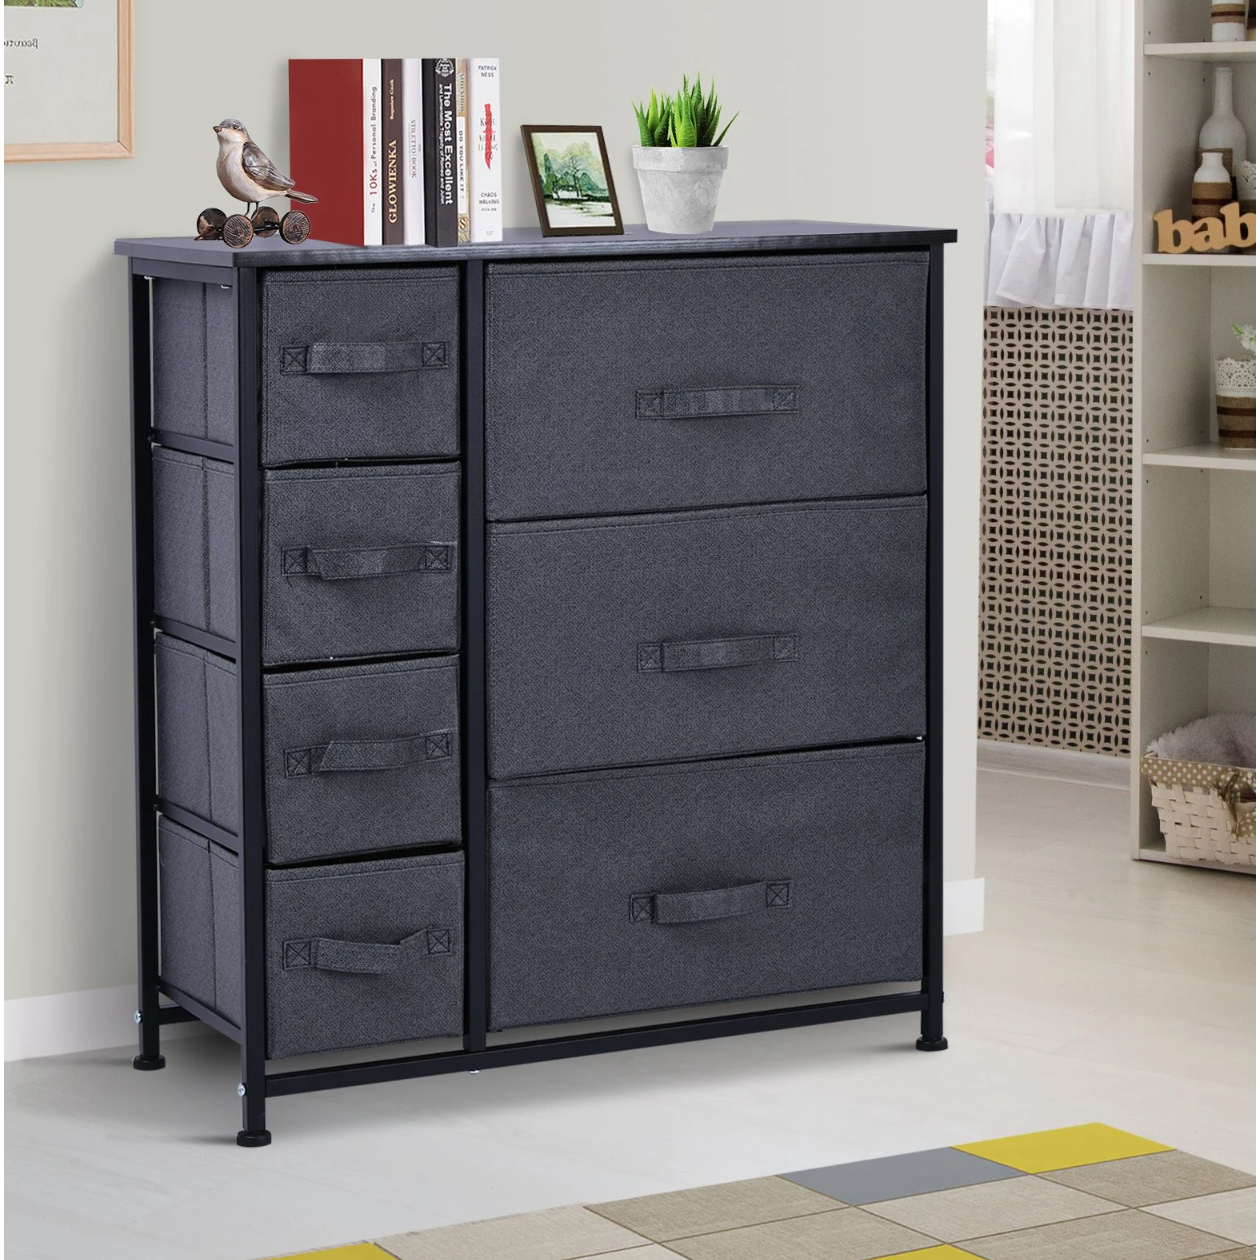 Nancy's Shoreview Chest of Drawers - Storage Cabinet - Chest of Drawers - 7 Fabric Drawers - Wood - Linen - Gray - 63.5 x 30 x 71 cm 